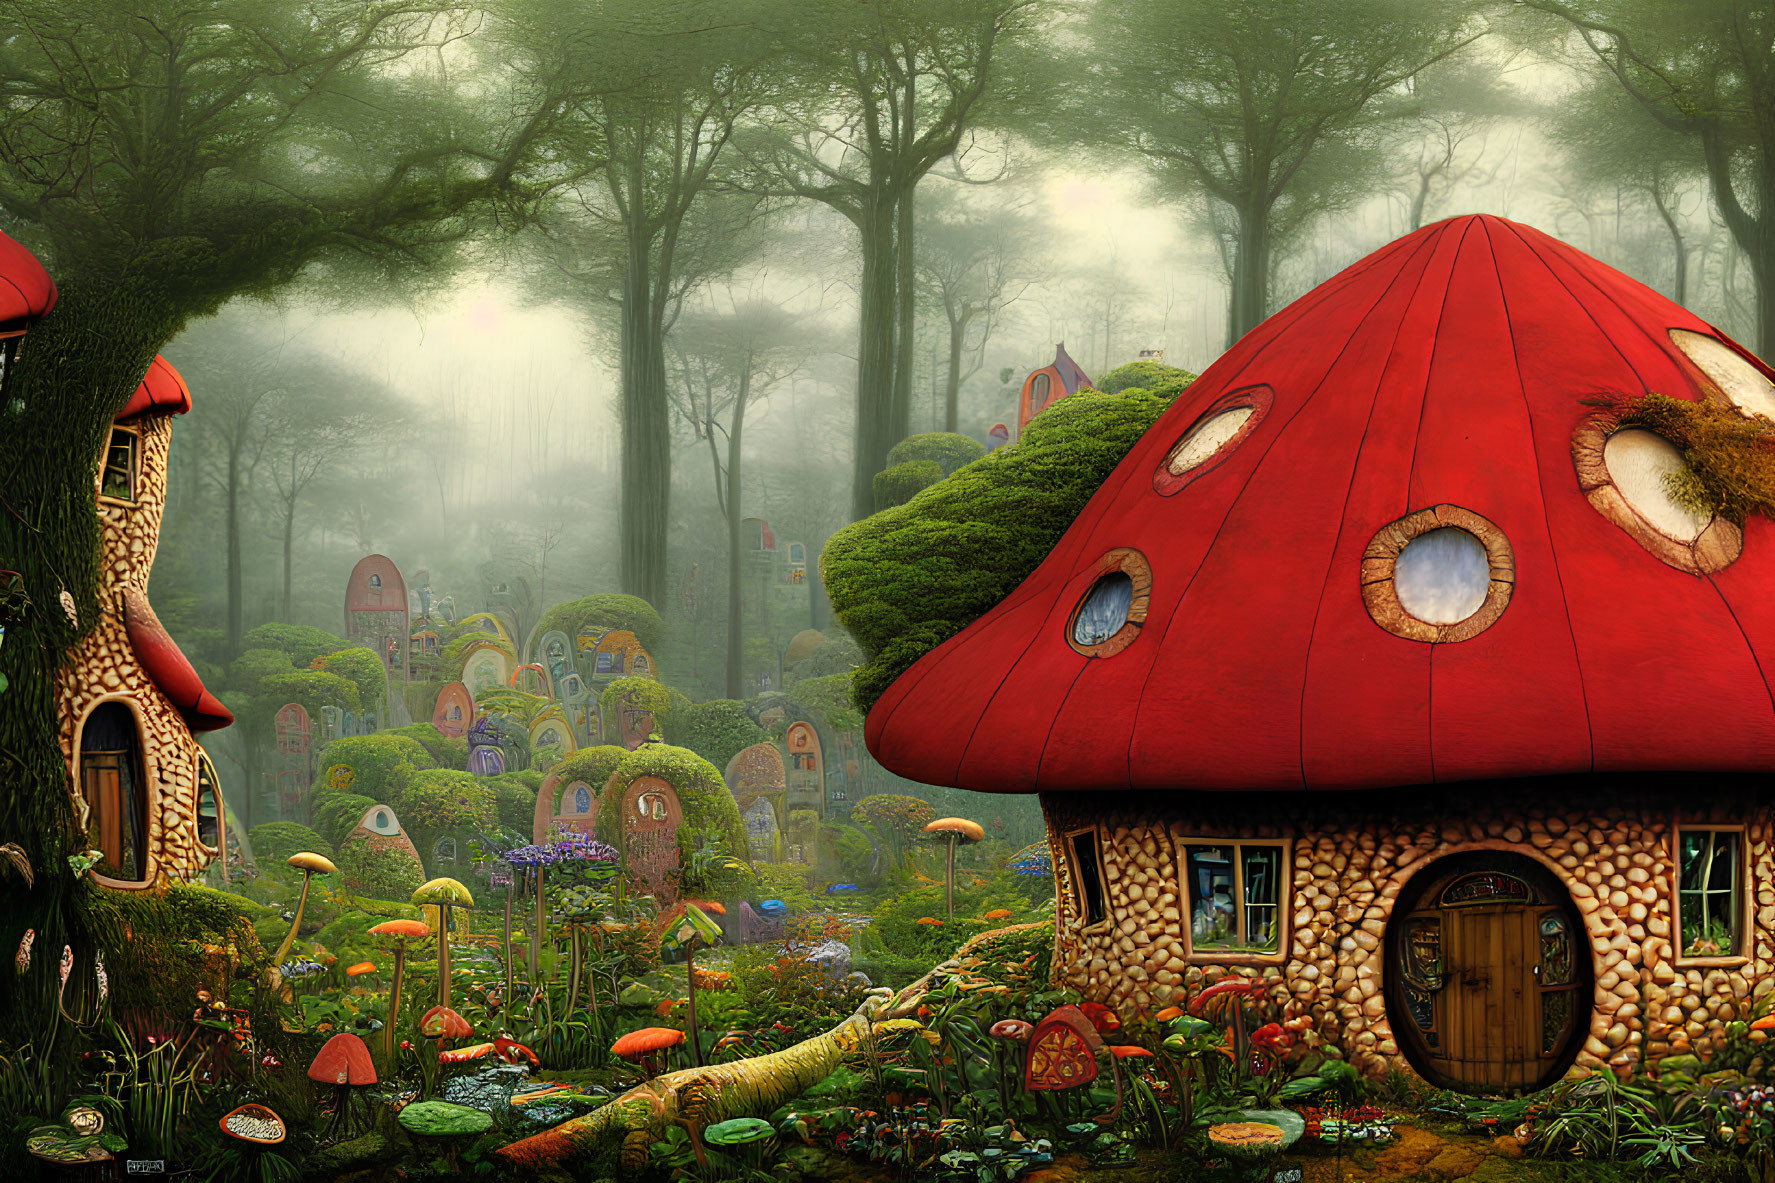 Enchanted forest scene with mushroom houses and mystical fog